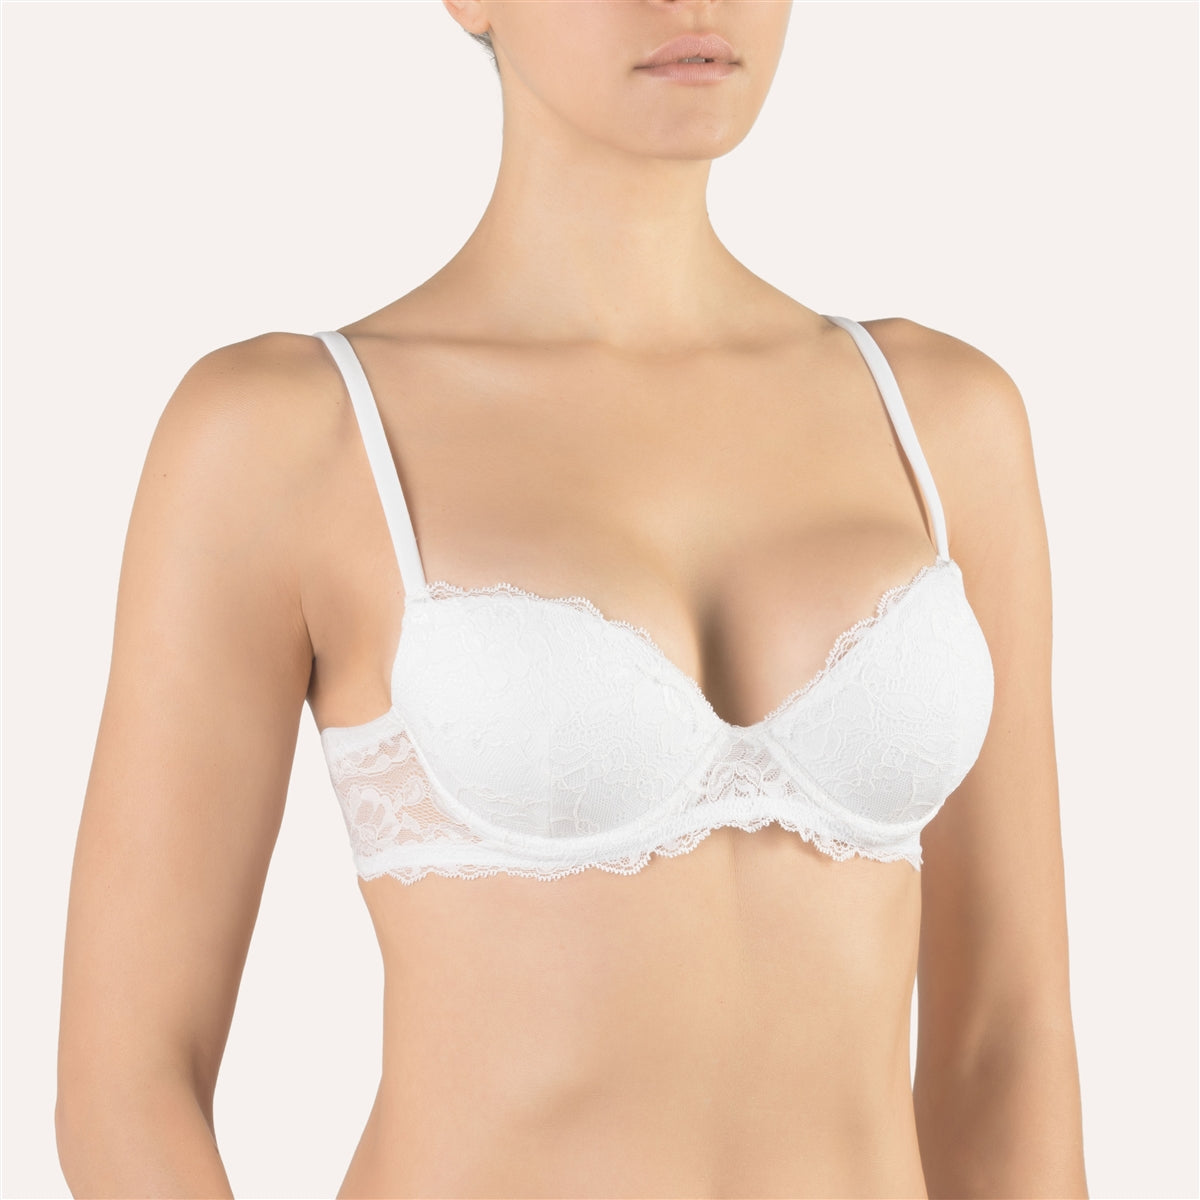 Padded white lace bra with underwire by luxury lingerie label Cotton Club, Made in Italy